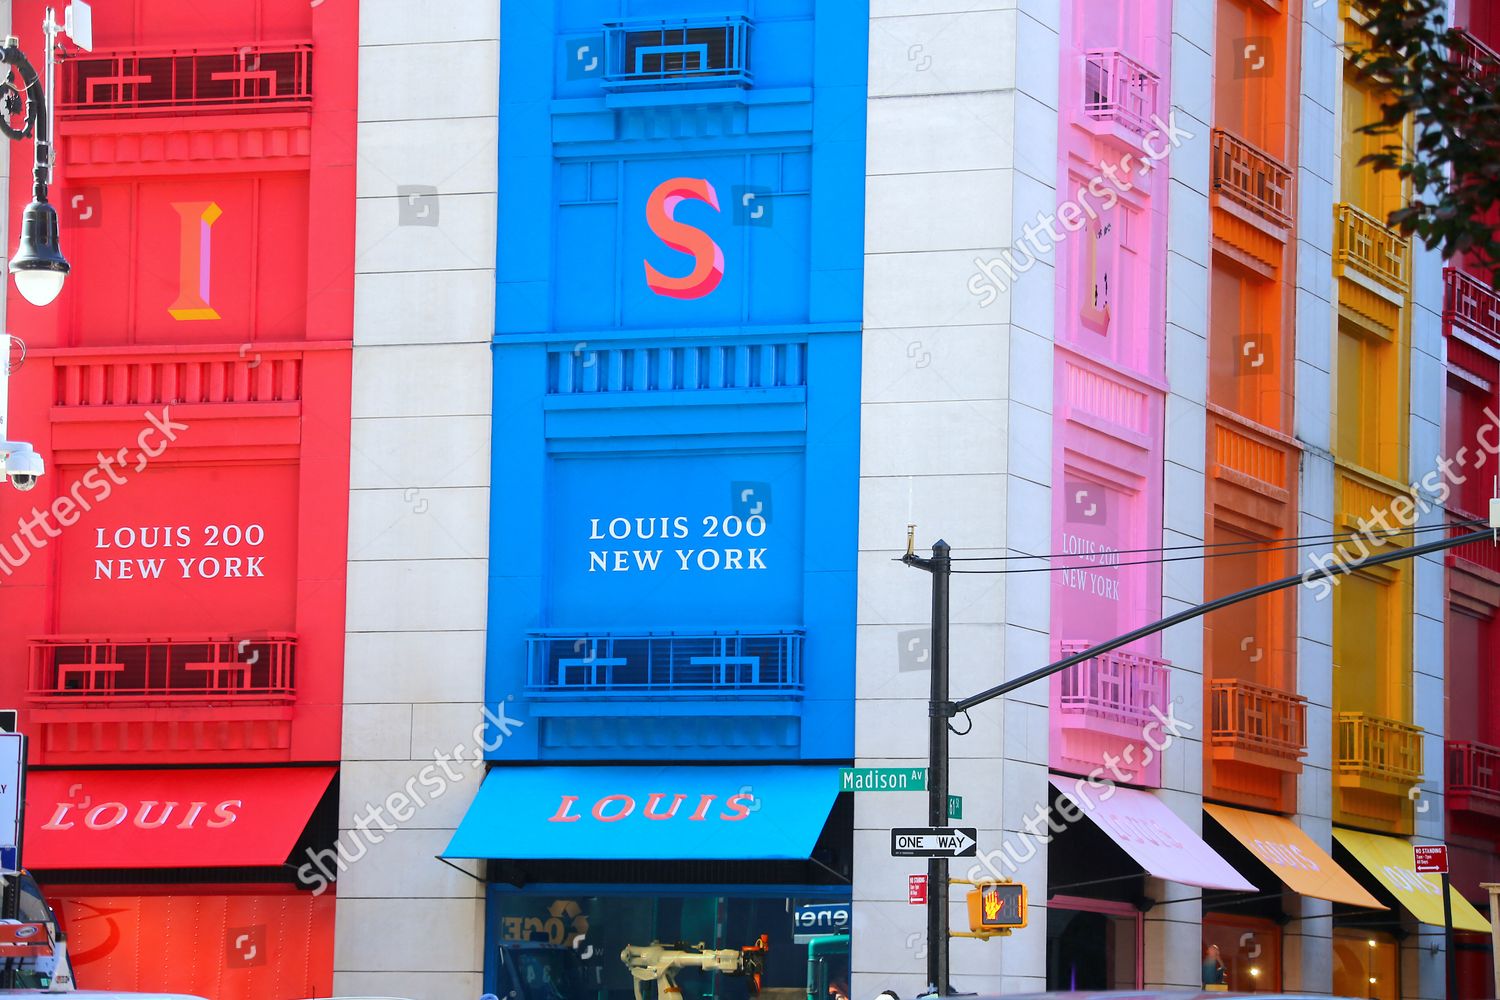 louis 200 nyc